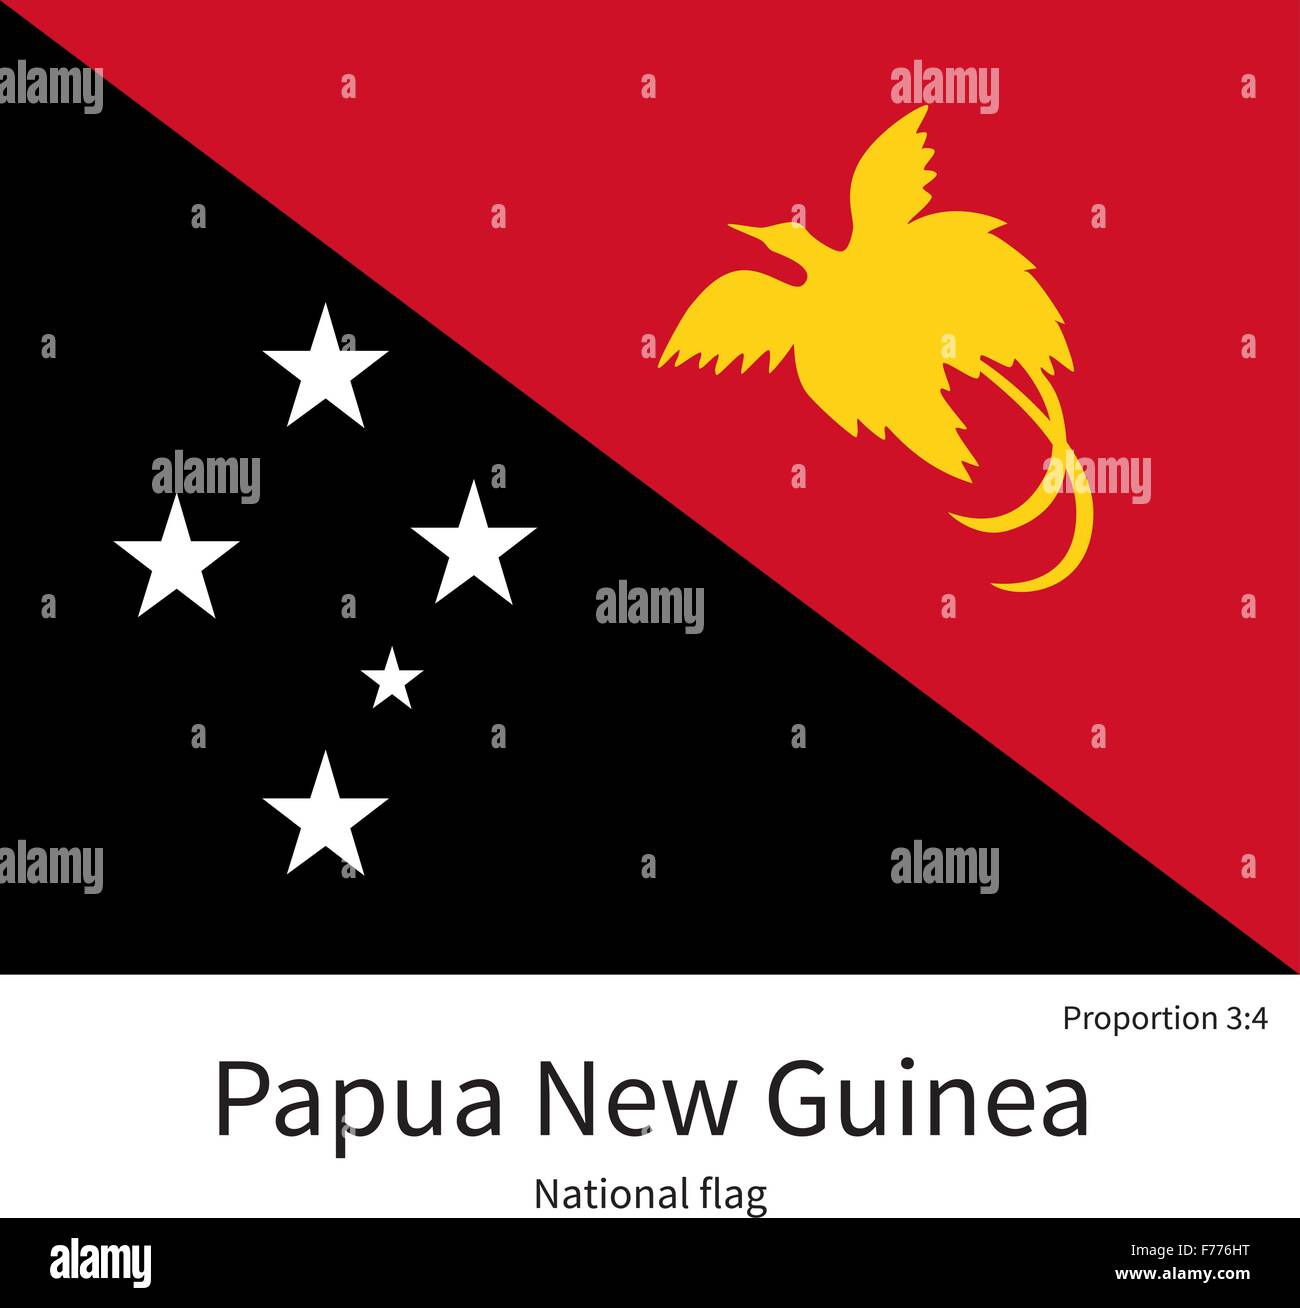 National Flag Of Papua New Guinea With Correct Proportions Element Colors Stock Vector Image